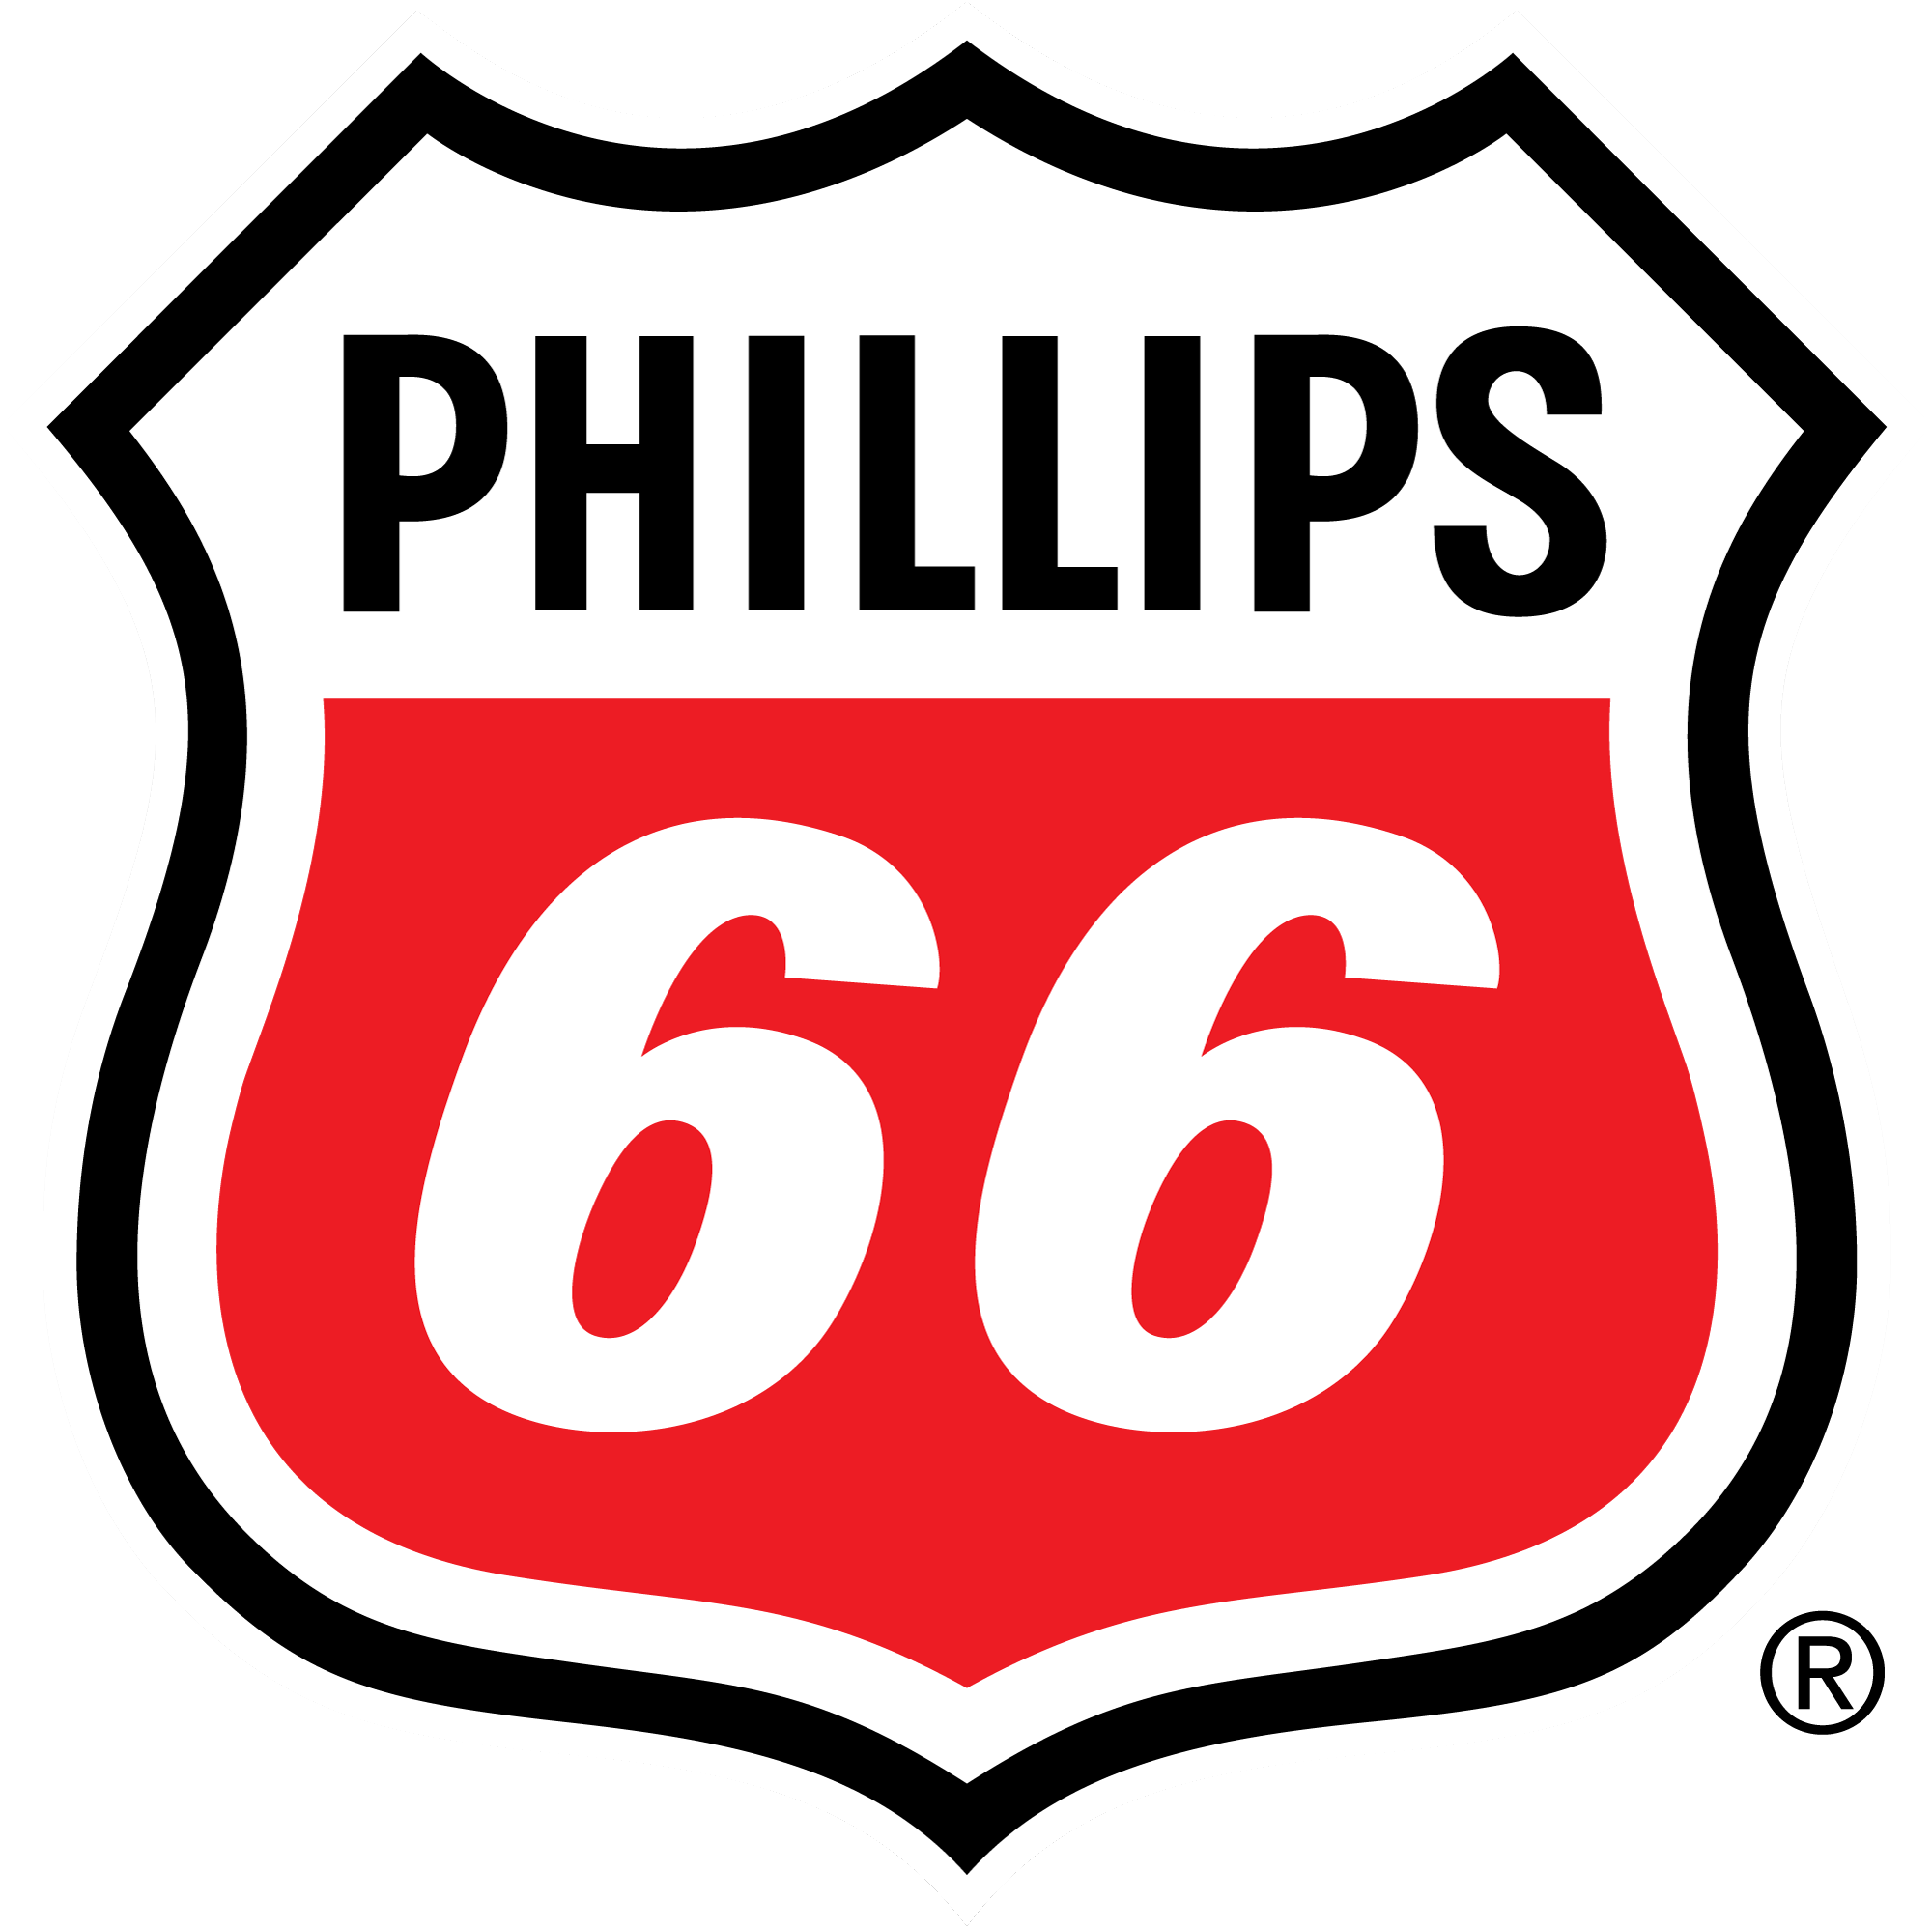 A. Phillips 66 (Nivel 2)